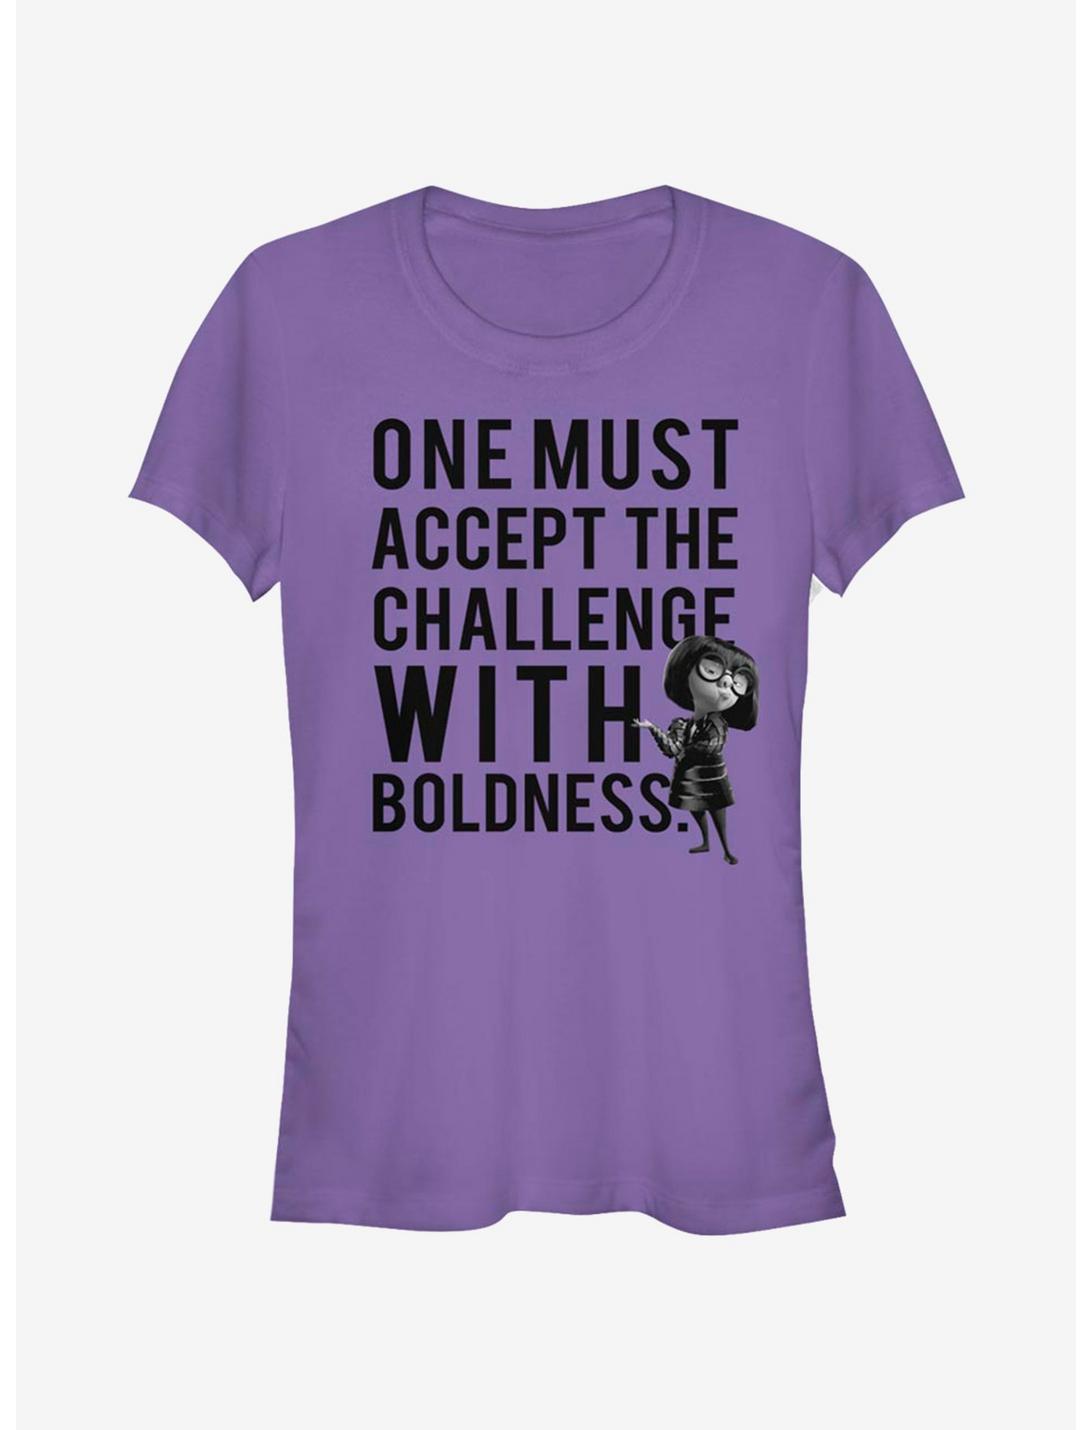 Disney Pixar The Incredibles With Boldness Girls T-Shirt, PURPLE, hi-res